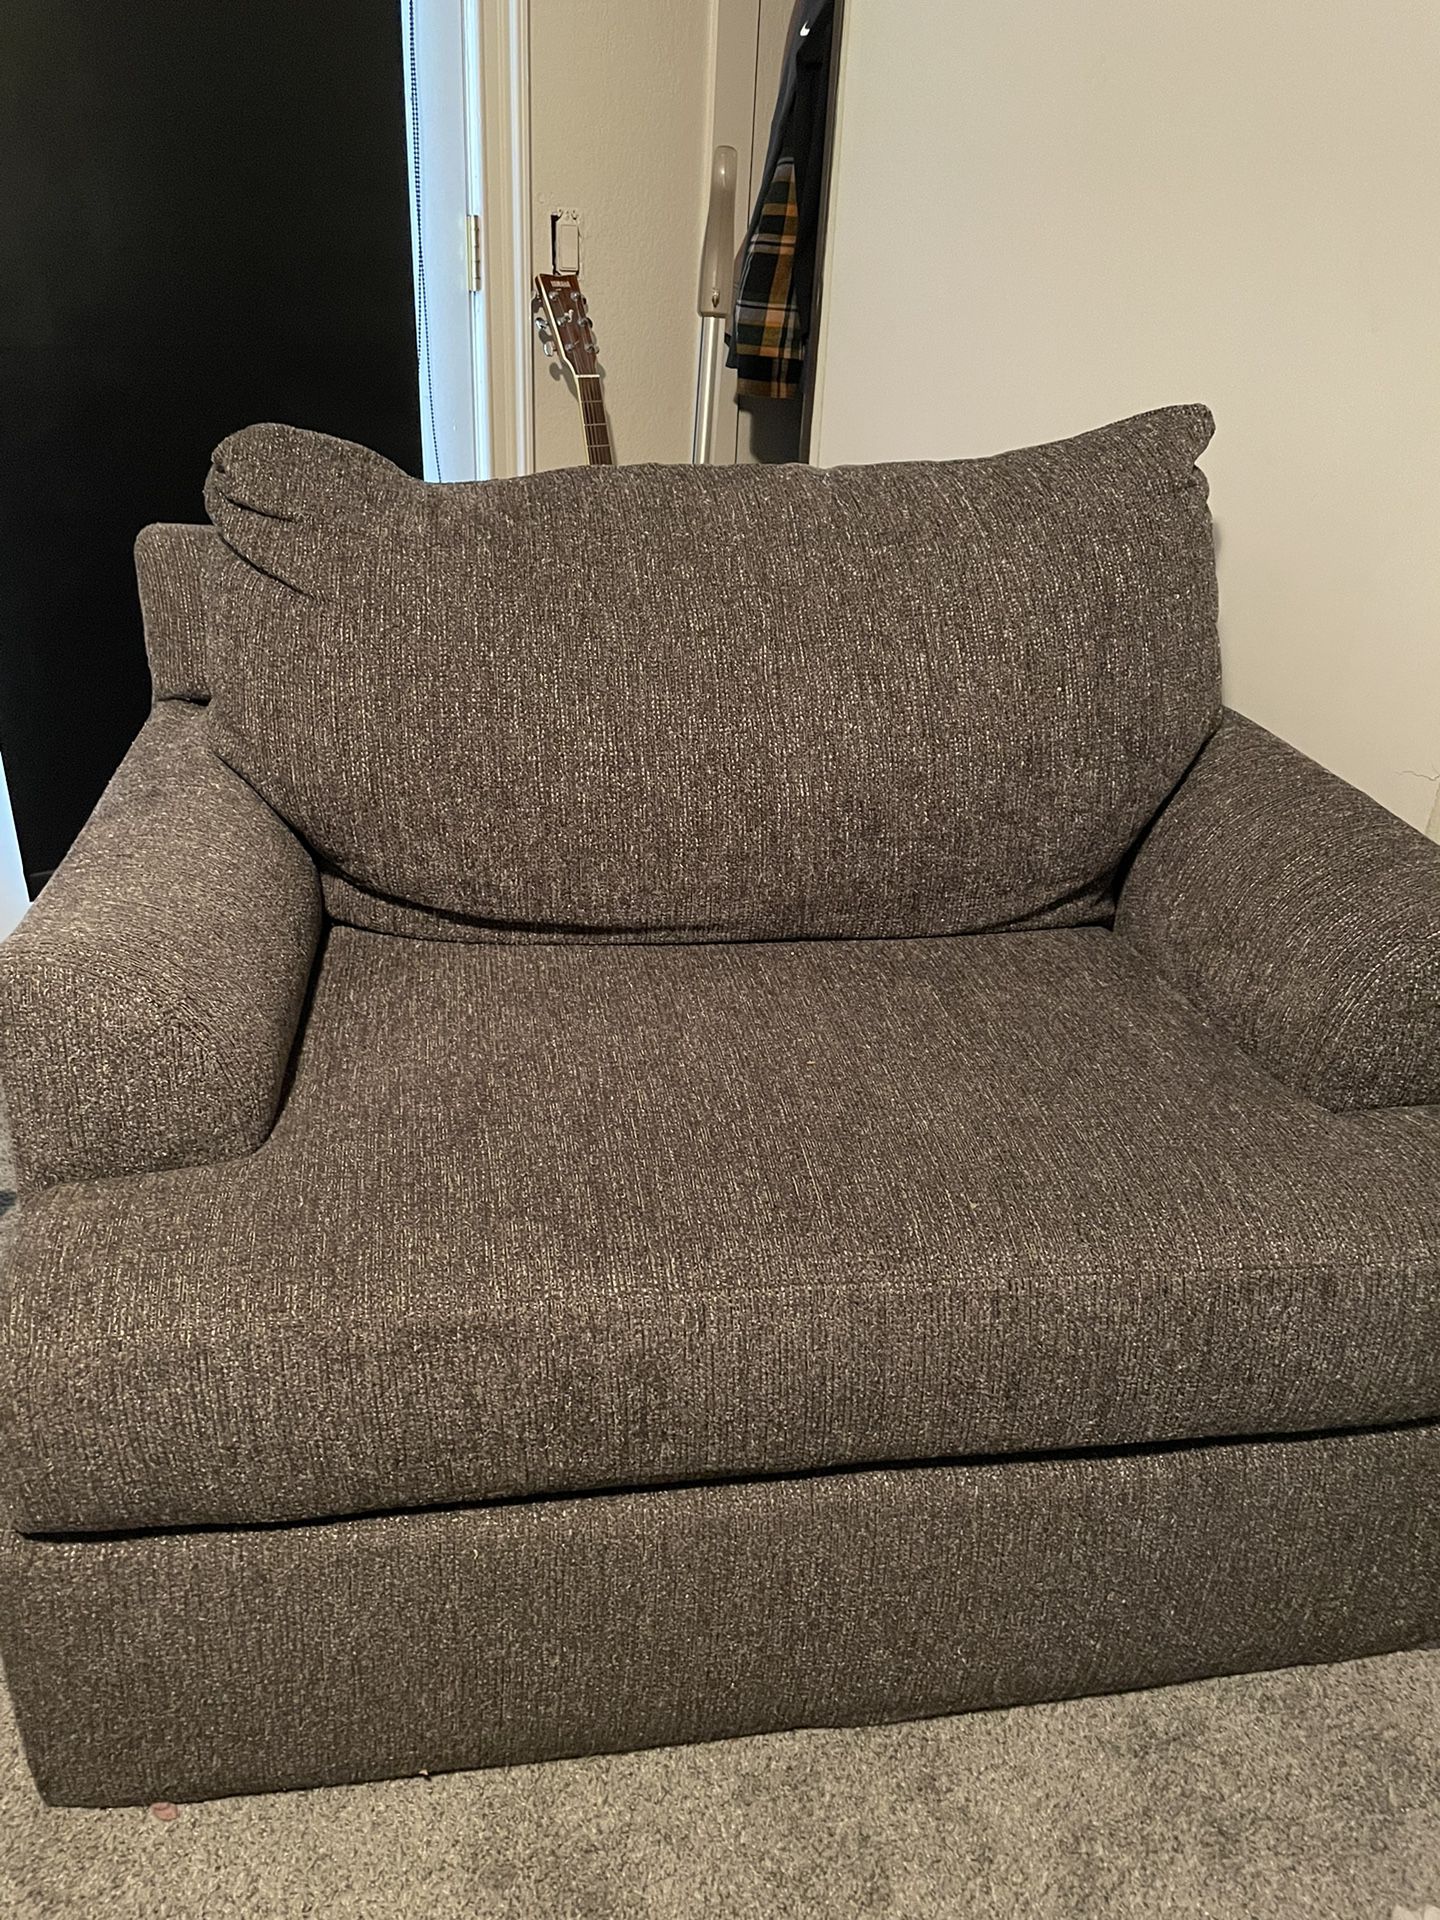 Huge Living Room  Chair/Couch 